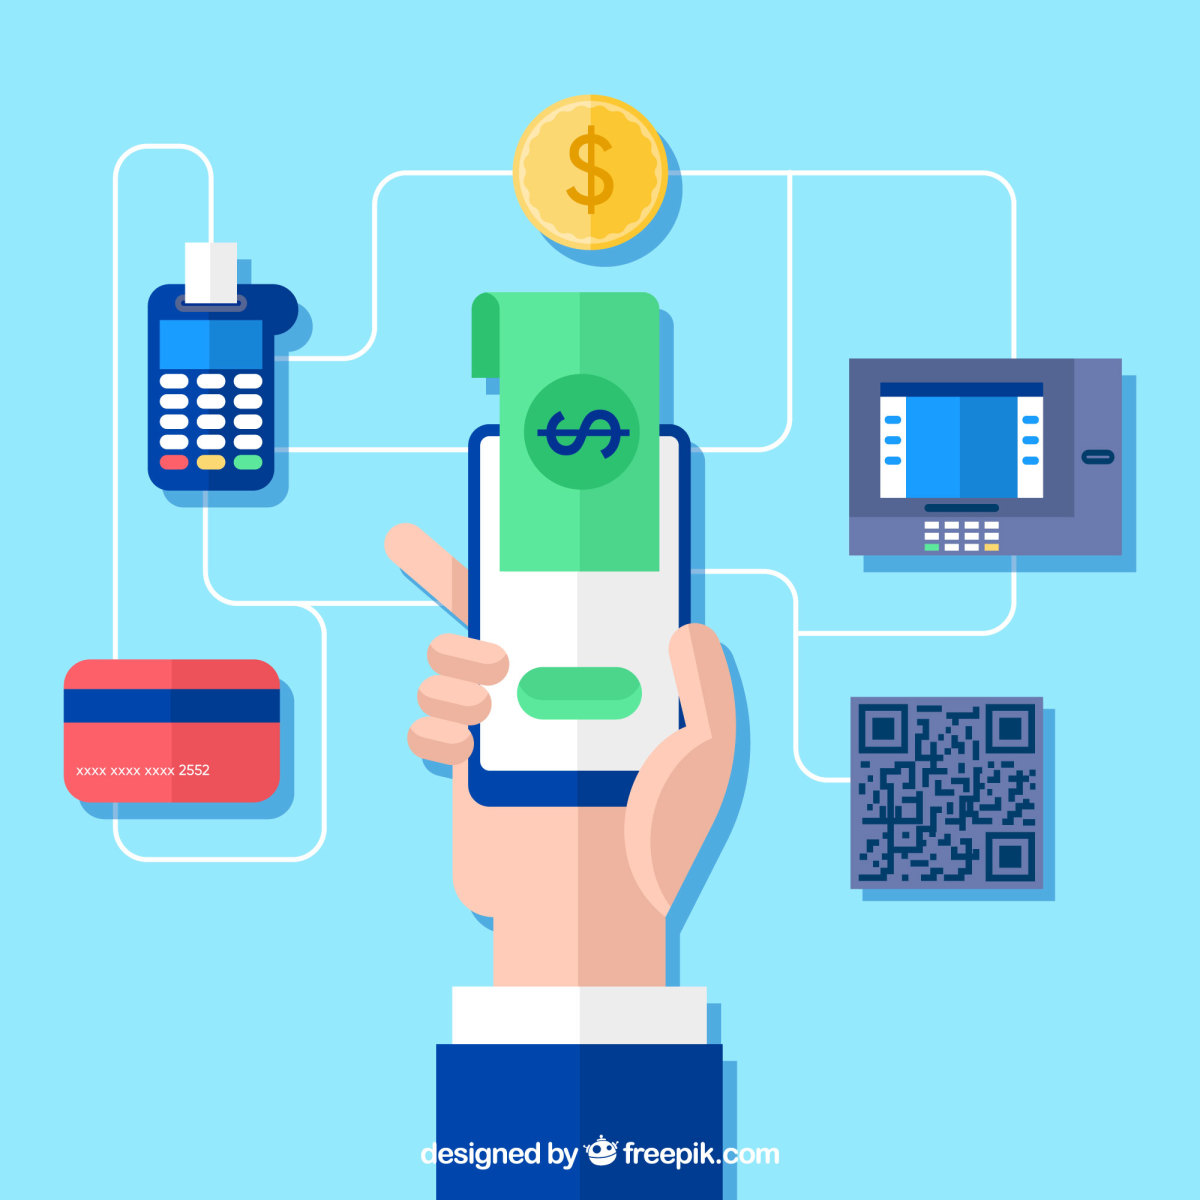 how-electronic-payments-changed-the-retail-payment-scenario